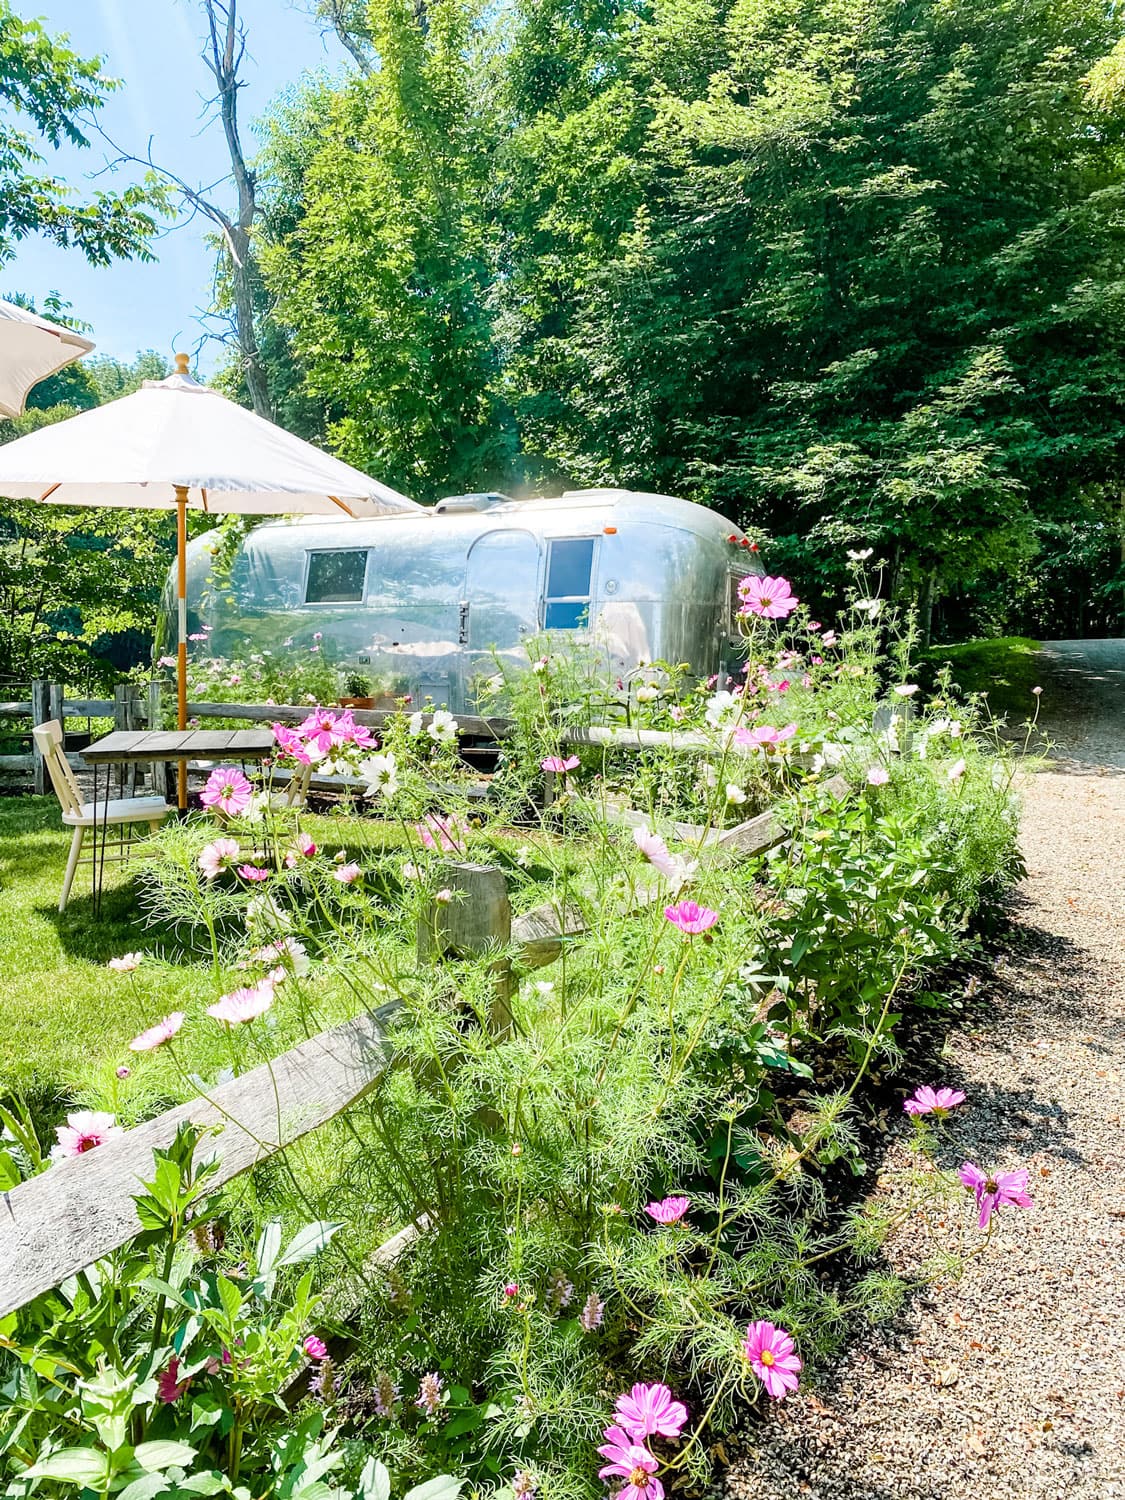 The Airstream at the Lost Kitchen with Cosmos growing wild